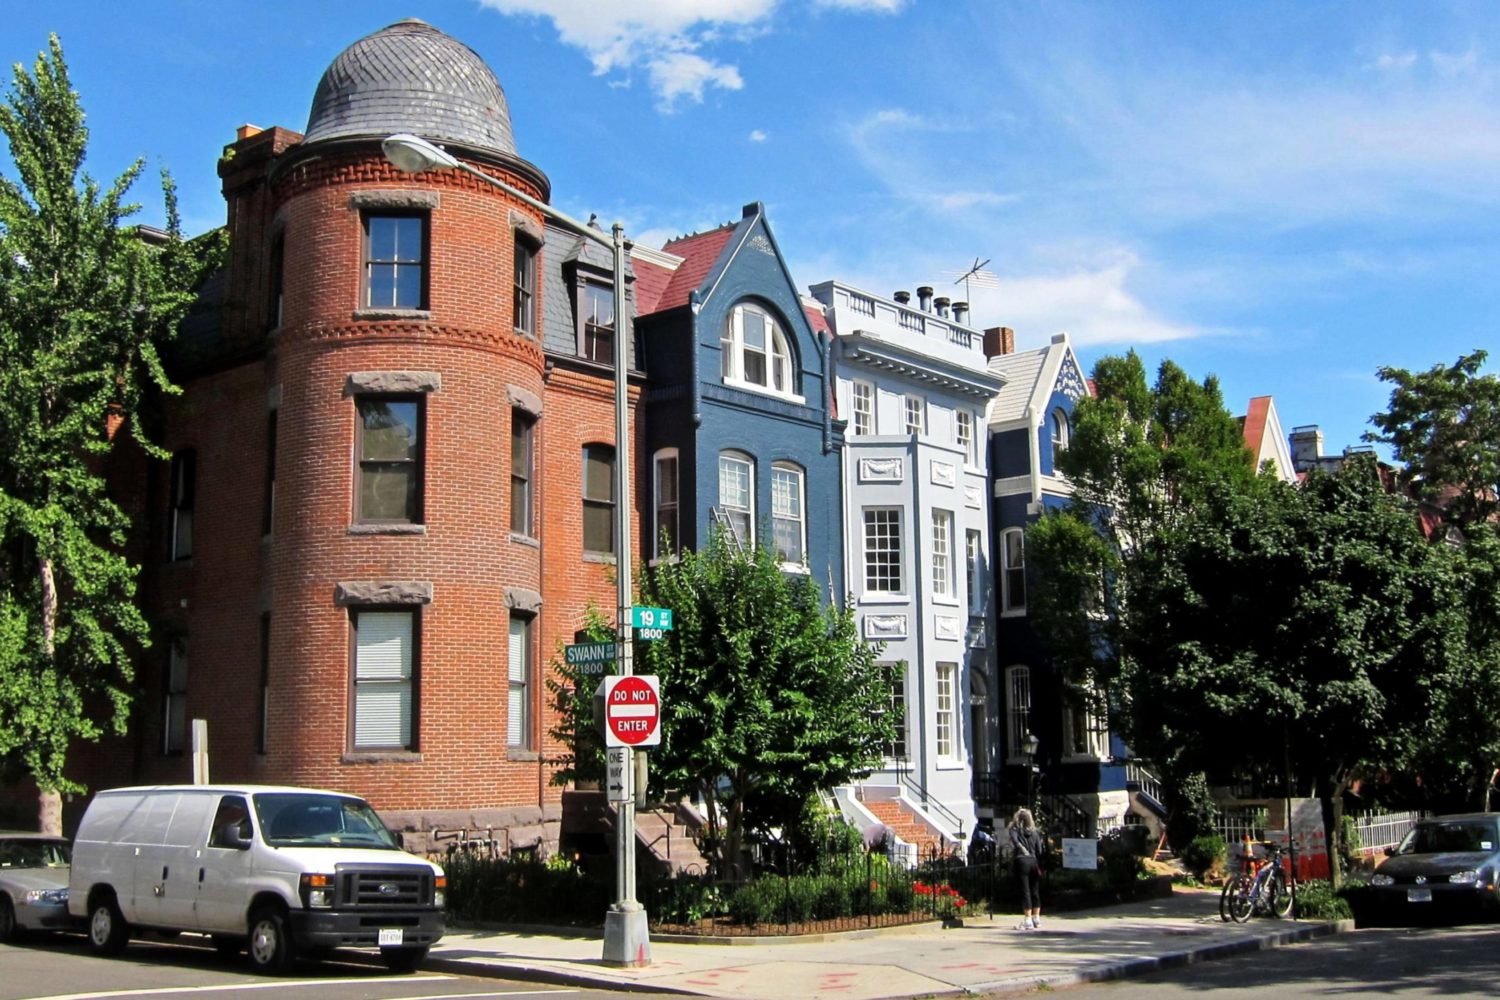 Dupont Circle neighborhood with historic homes. Photograph by Flickr user NCinDC.